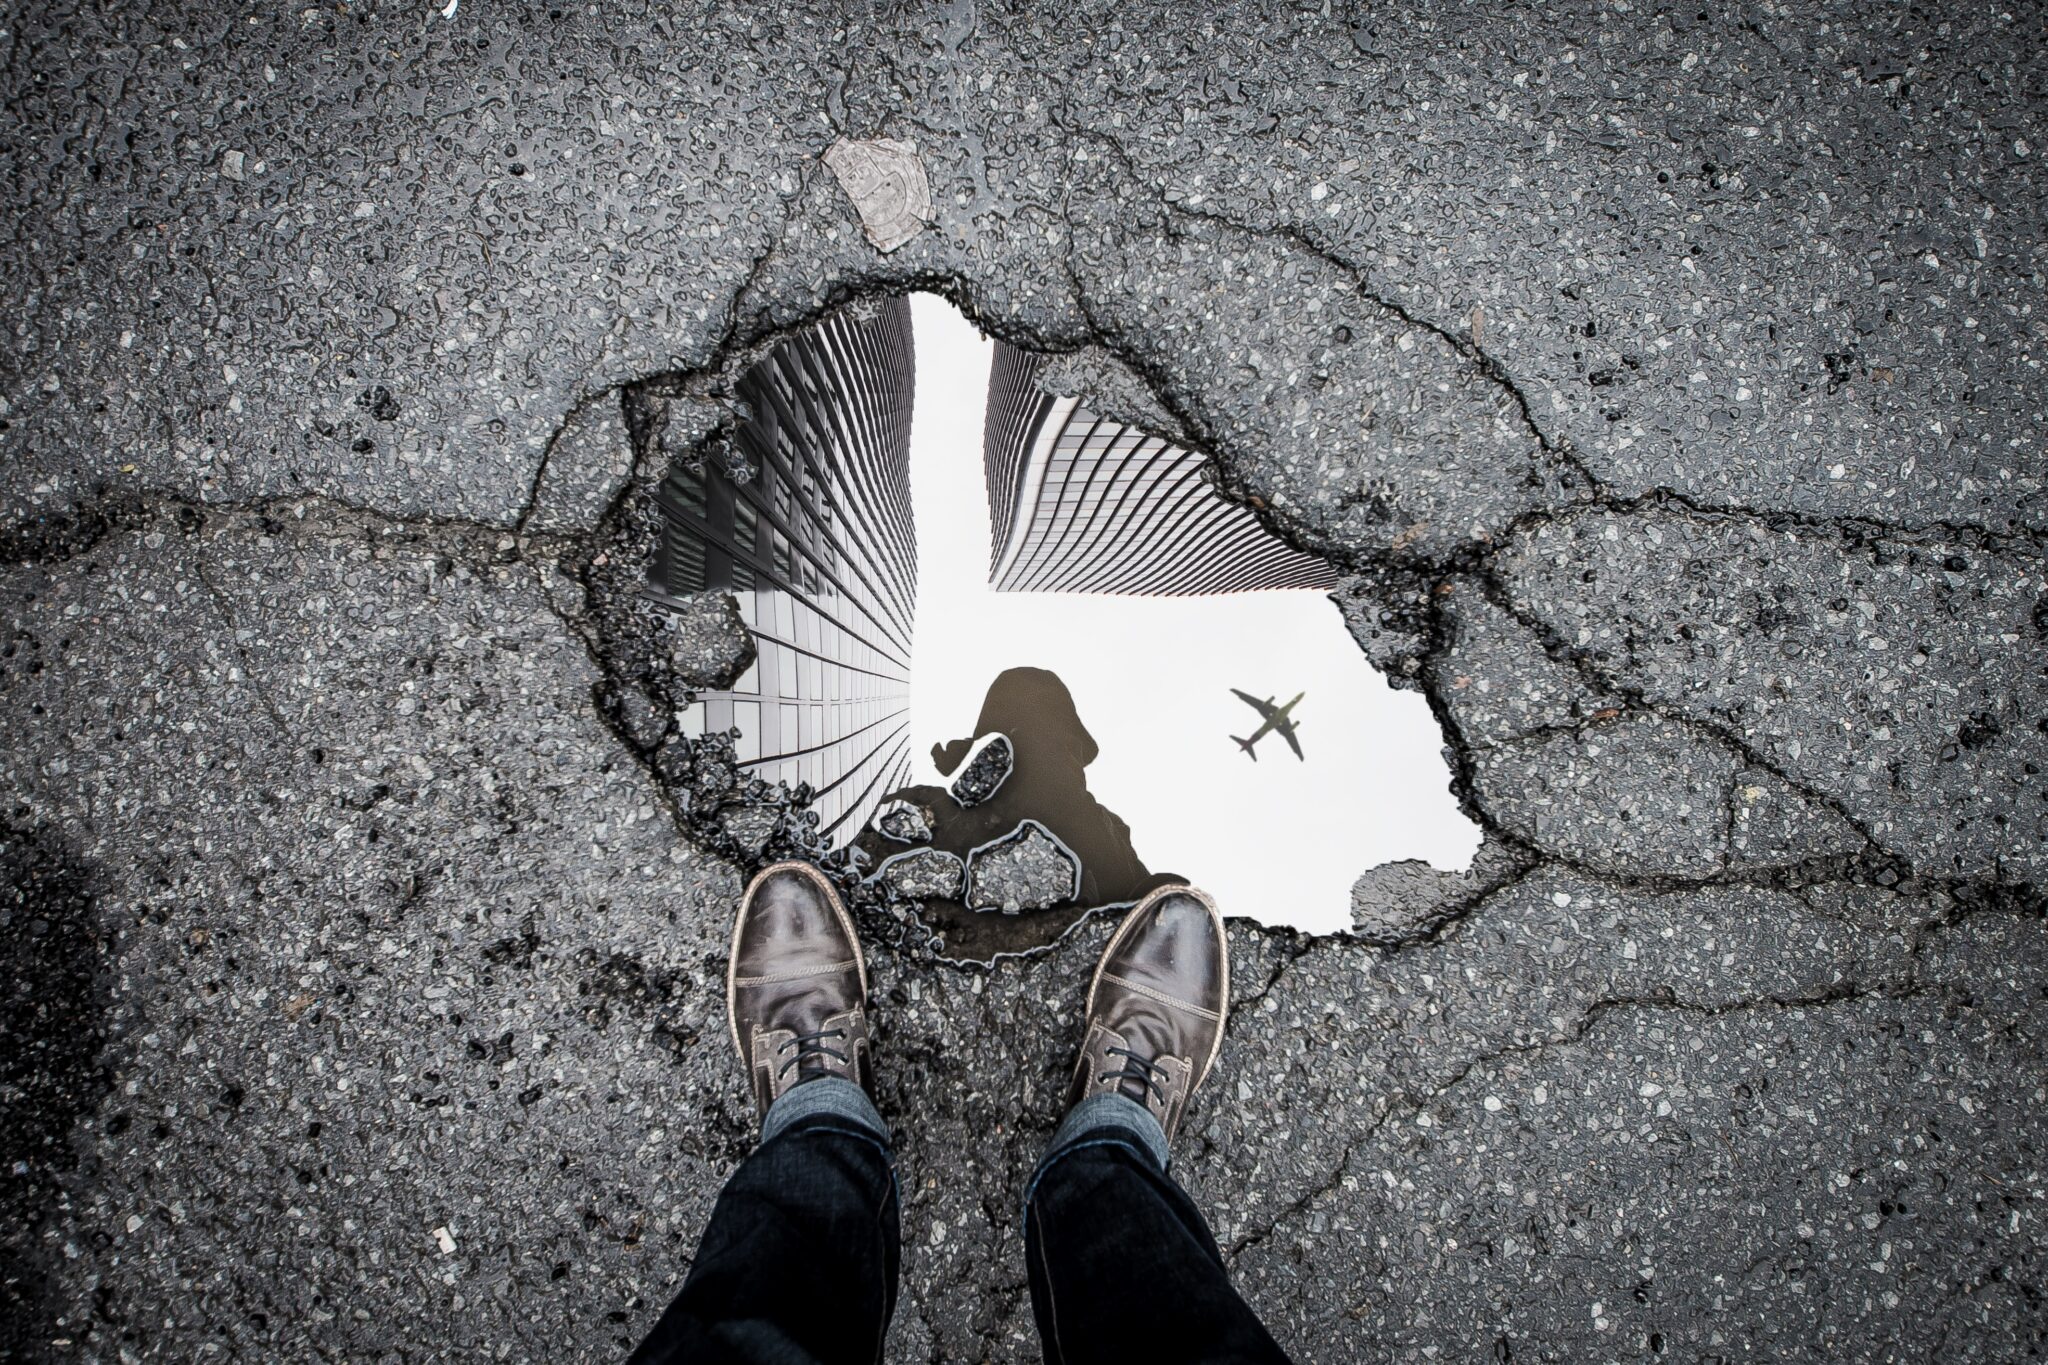 Picture of a person's reflection in a puddle of water